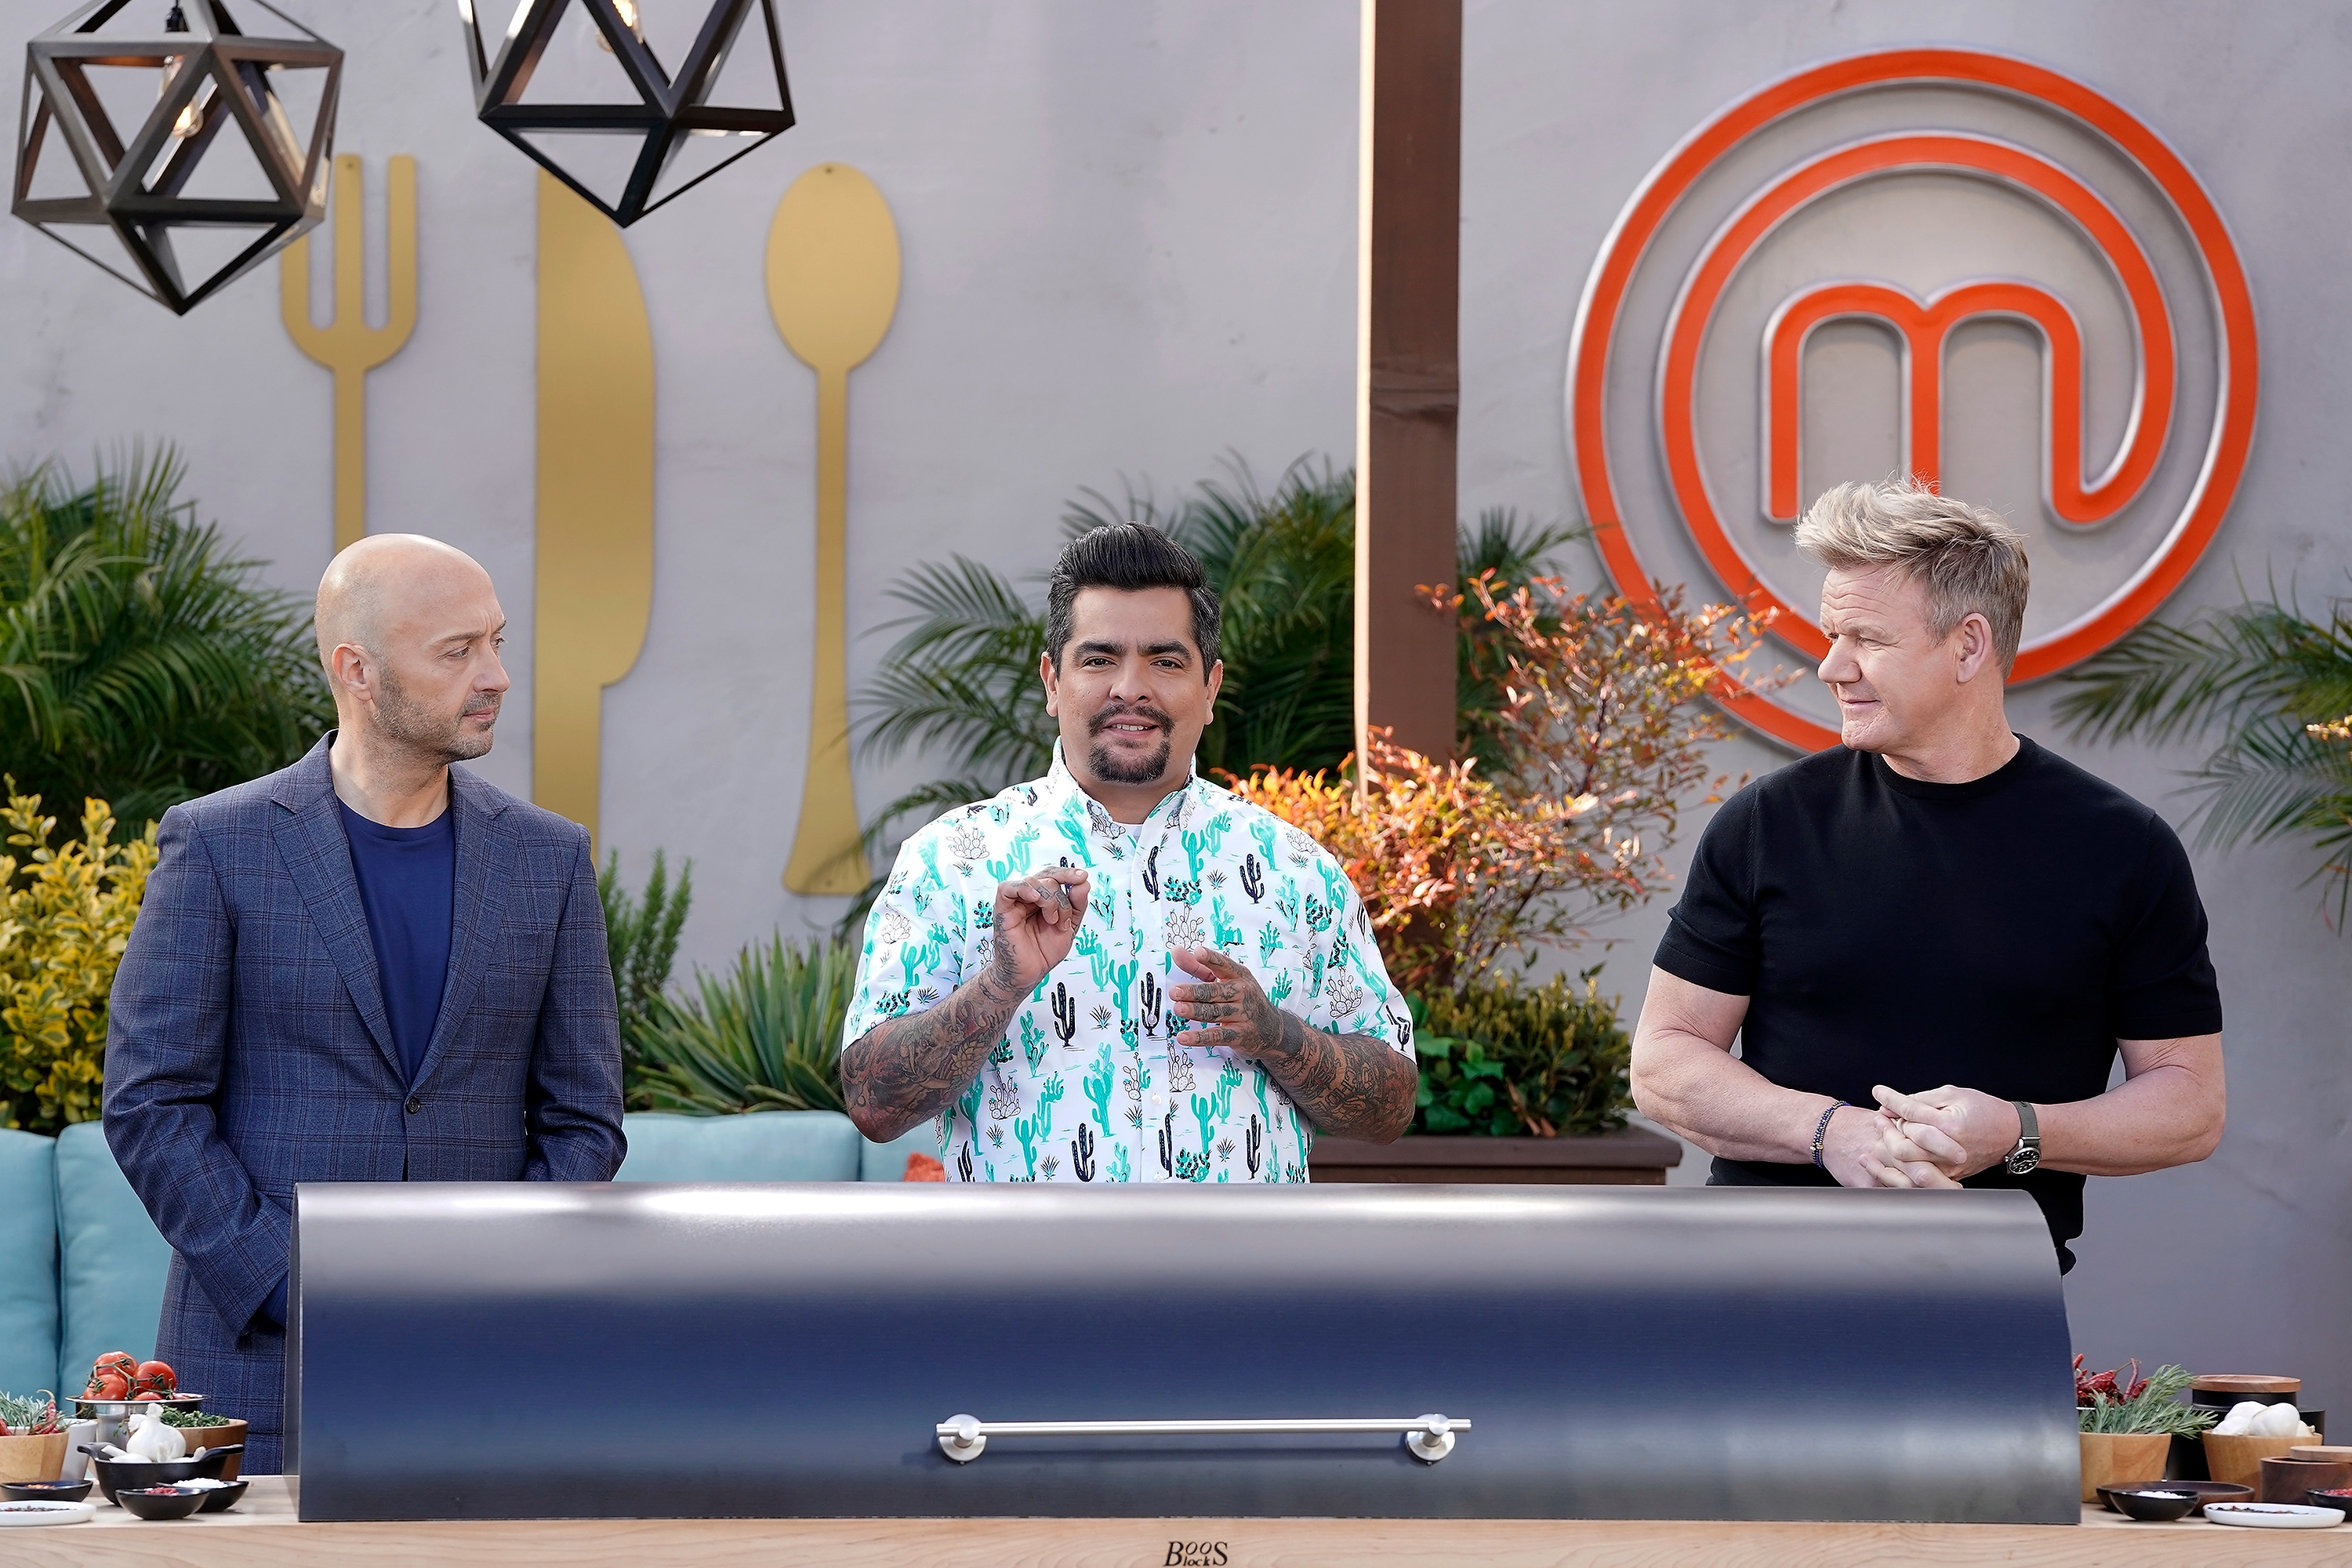 ‘MasterChef’ Aarón Sánchez Dishes on Season 11: ‘We Want It to Be More Intense’